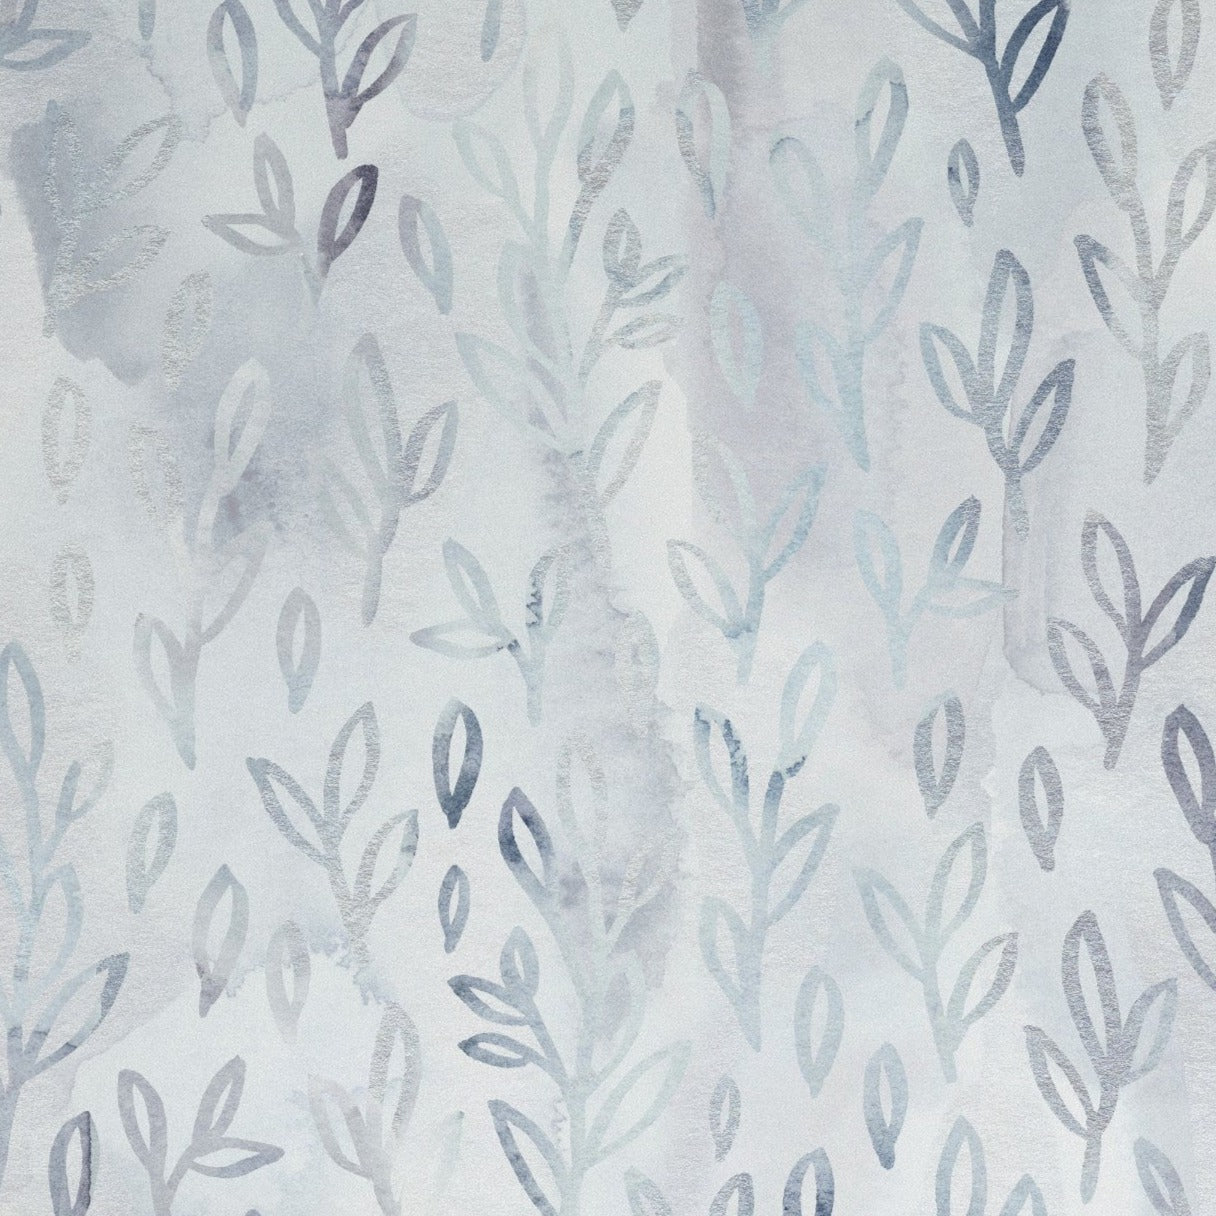 Close-up view of the Floral Foil Wallpaper II showcasing soft blue and grey watercolor leaves on a textured, misty background, giving a serene and delicate feel to the design.